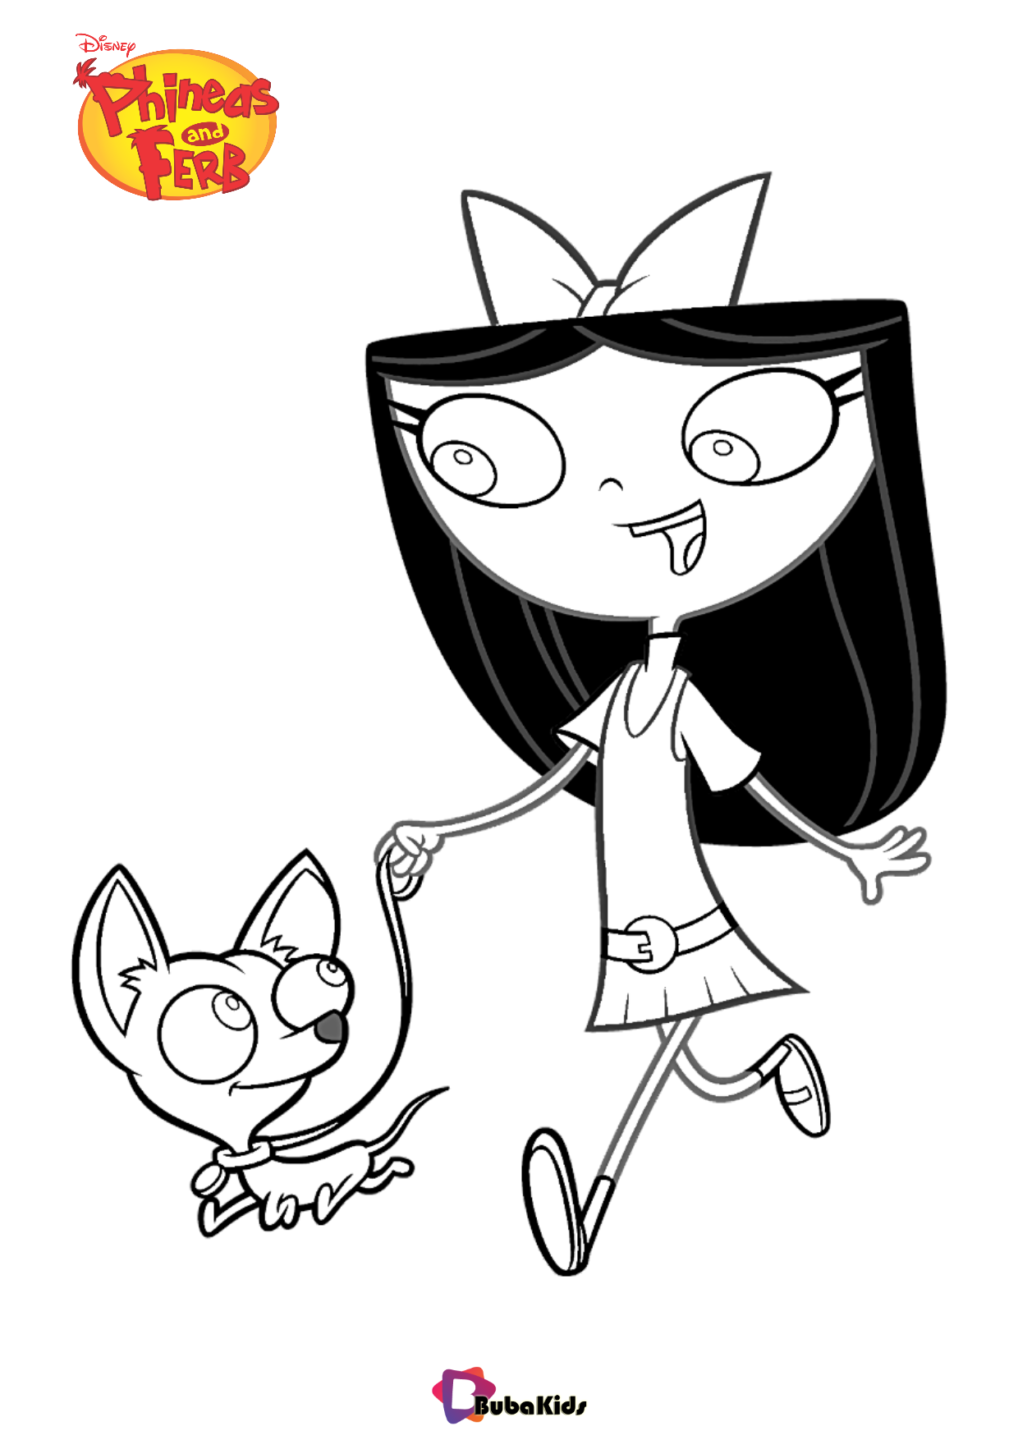 Isabella Garcia Shapiro Phineas and Ferb coloring page